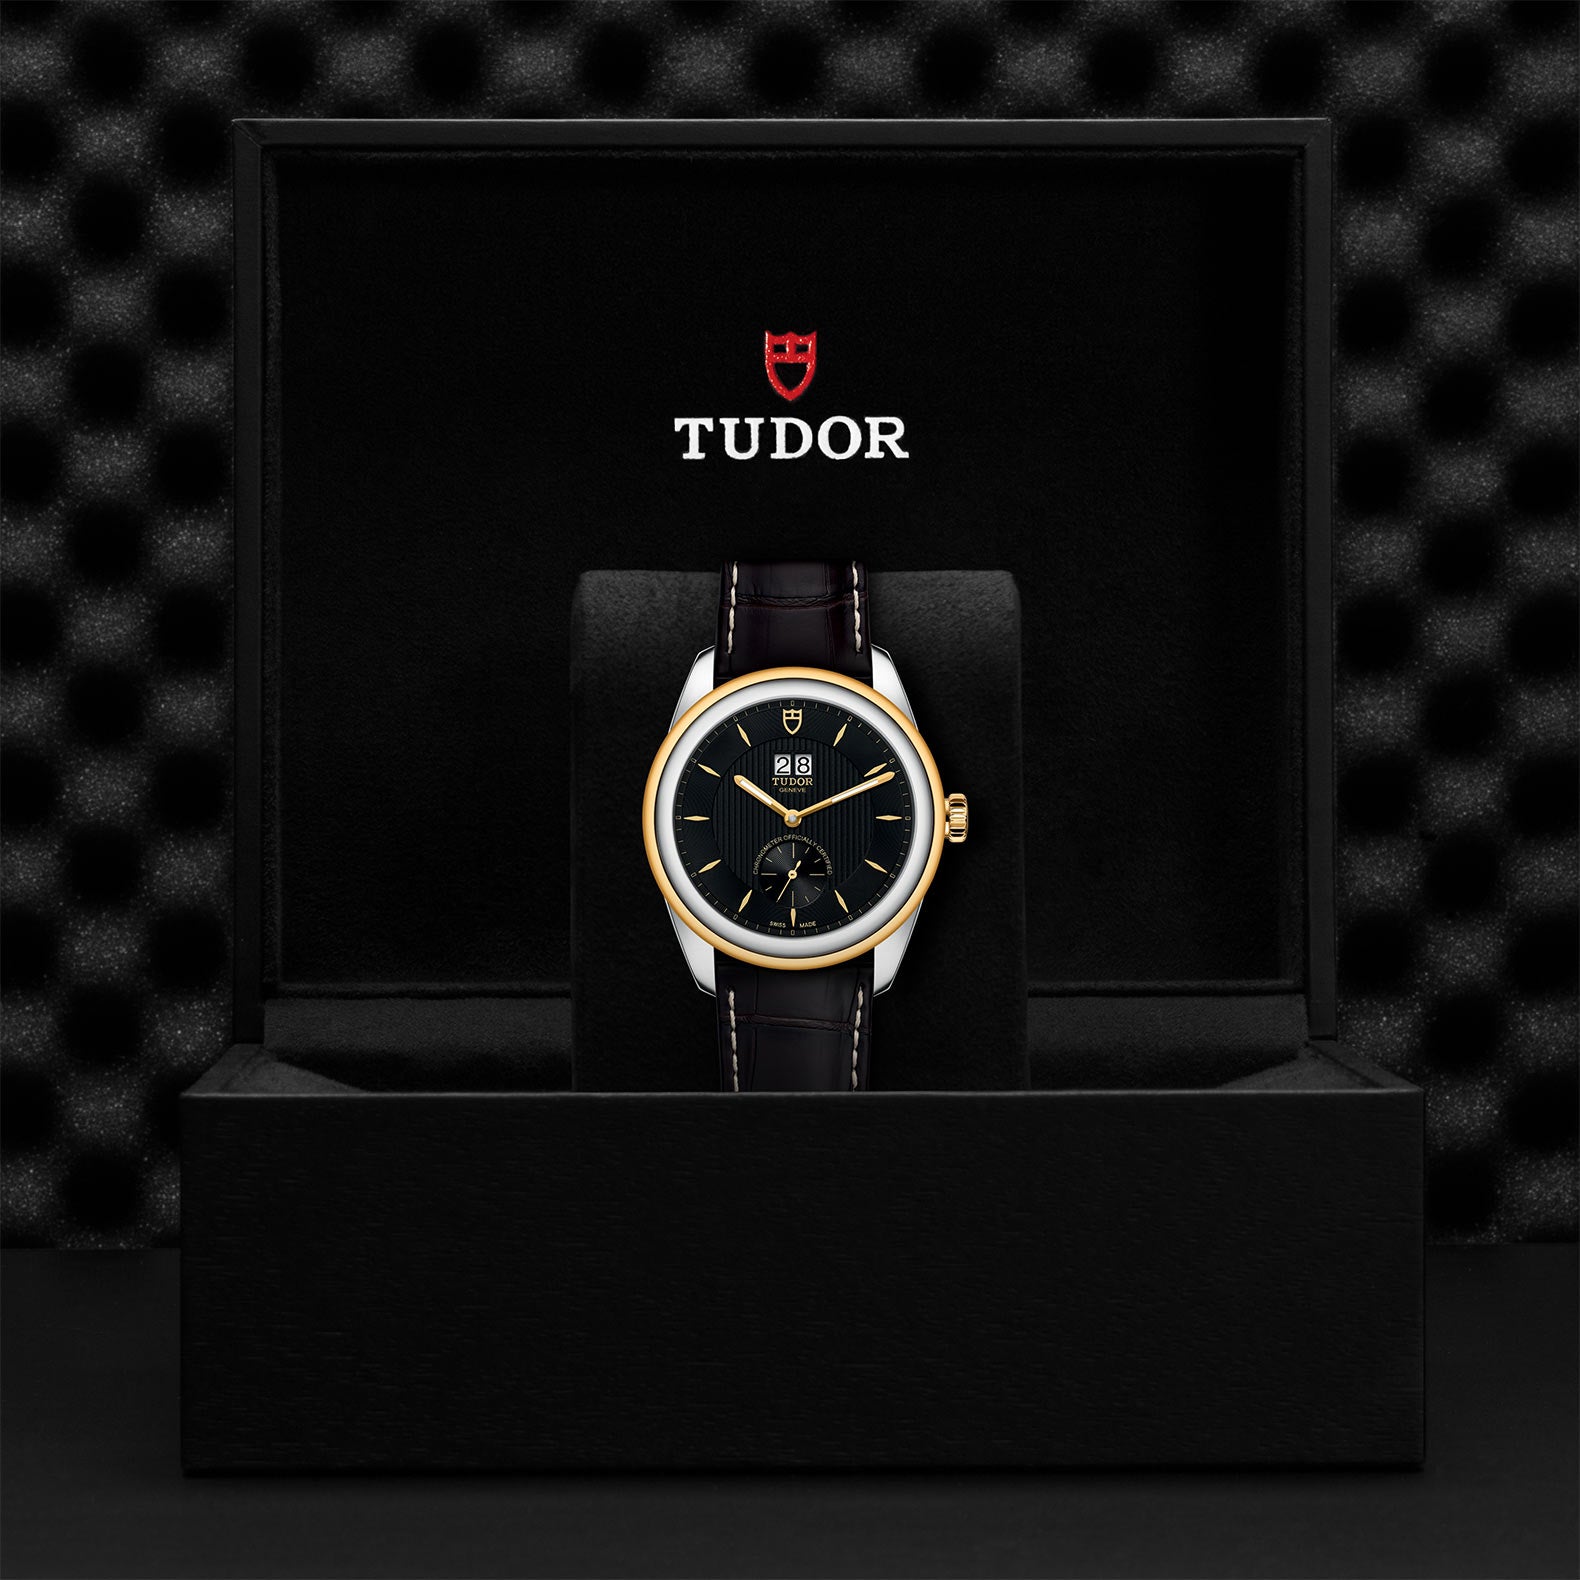 TUDOR Glamour Double Date, model #M57103-0020, at IJL Since 1937